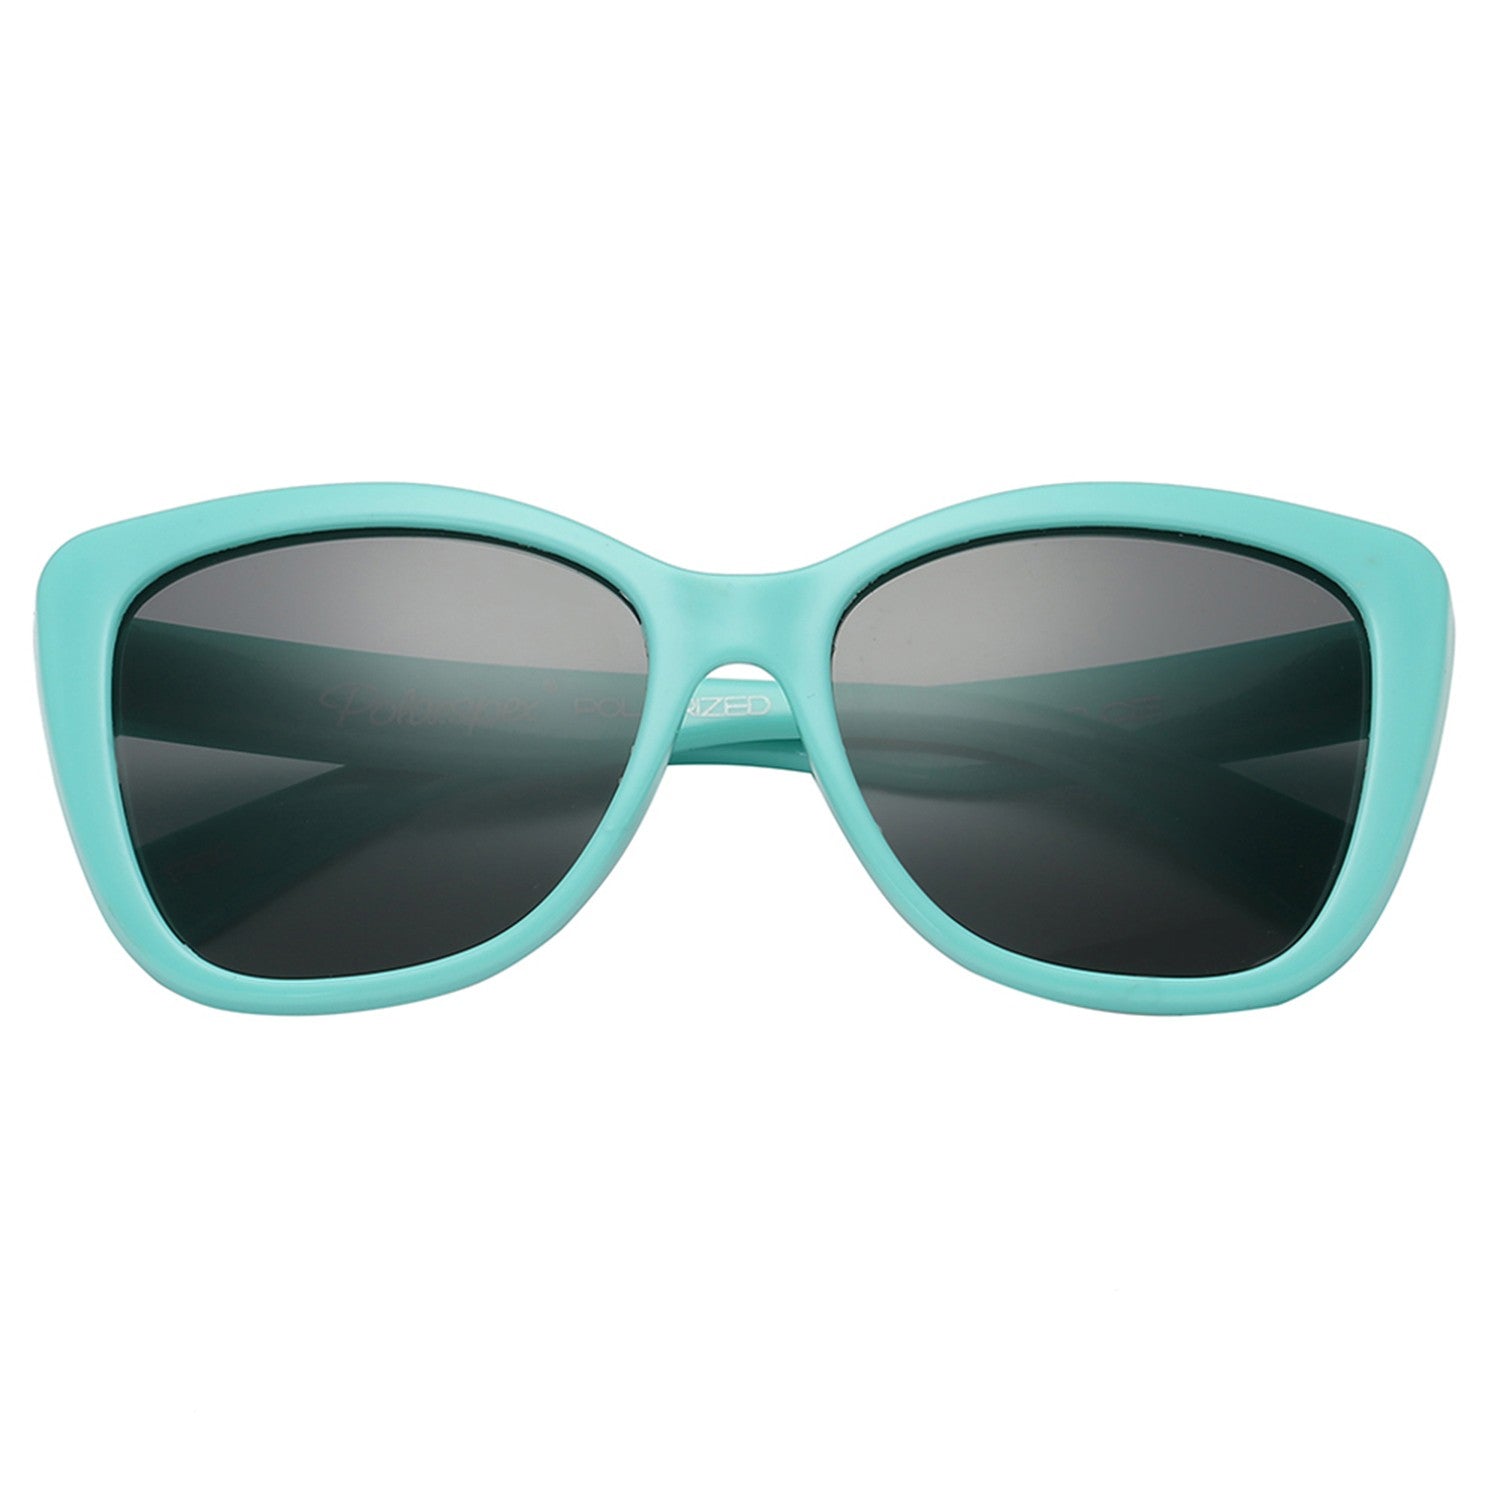 Polarspex Polarized Elastic Cateyes Style (BPA Free) Kids Sunglasses with Turquoise Teal Frames and Polarized Smoke Lenses for Girls (Ages 3 - 10)